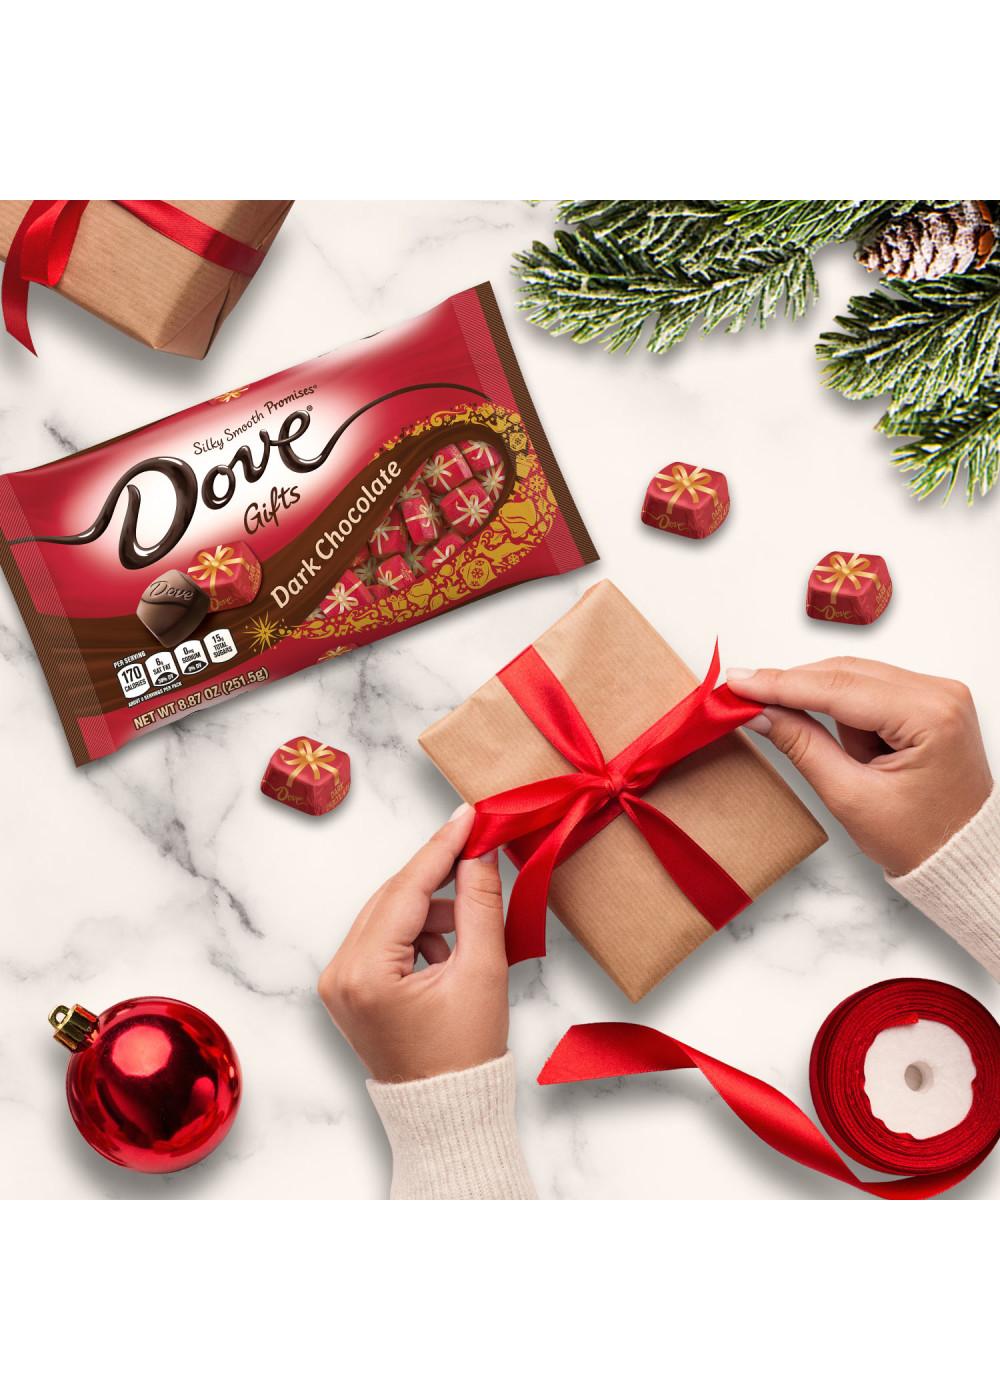 Dove Gifts Dark Chocolate Holiday Candy; image 5 of 8